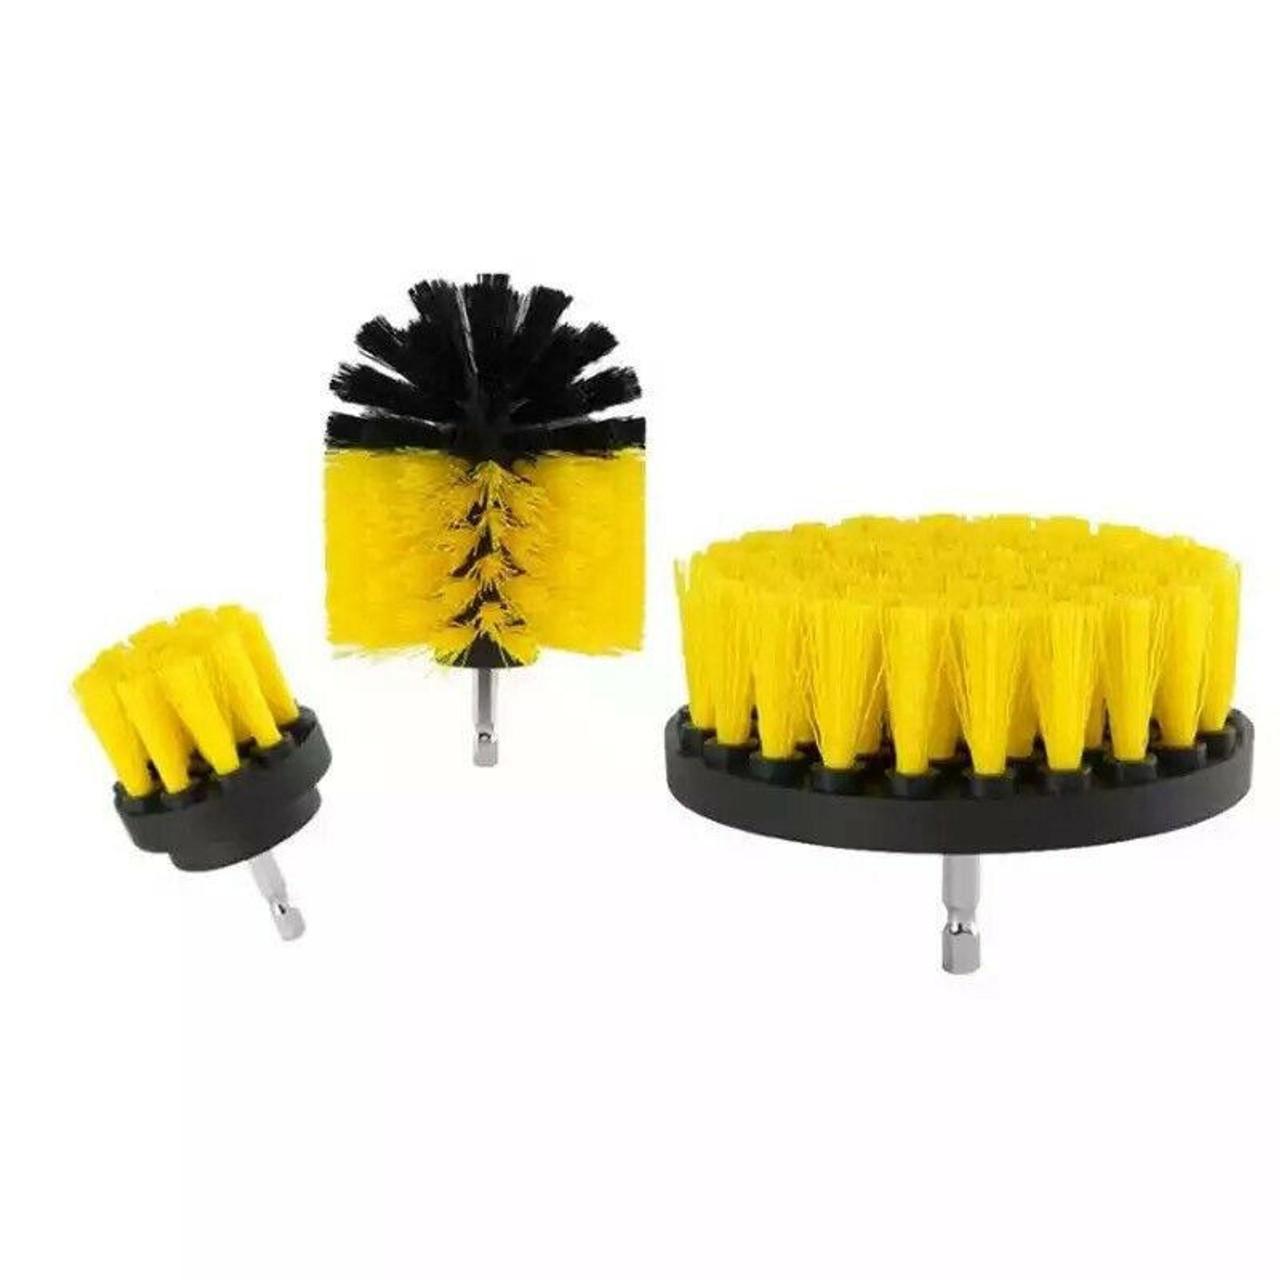 https://cdn11.bigcommerce.com/s-zrh8tkpr8d/images/stencil/1280x1280/products/9953/34054/3pcs-drill-brush-power-scrubber-drill-attachments-for-carpet-tile-grout-cleaning__15424.1665673105.jpg?c=2&imbypass=on